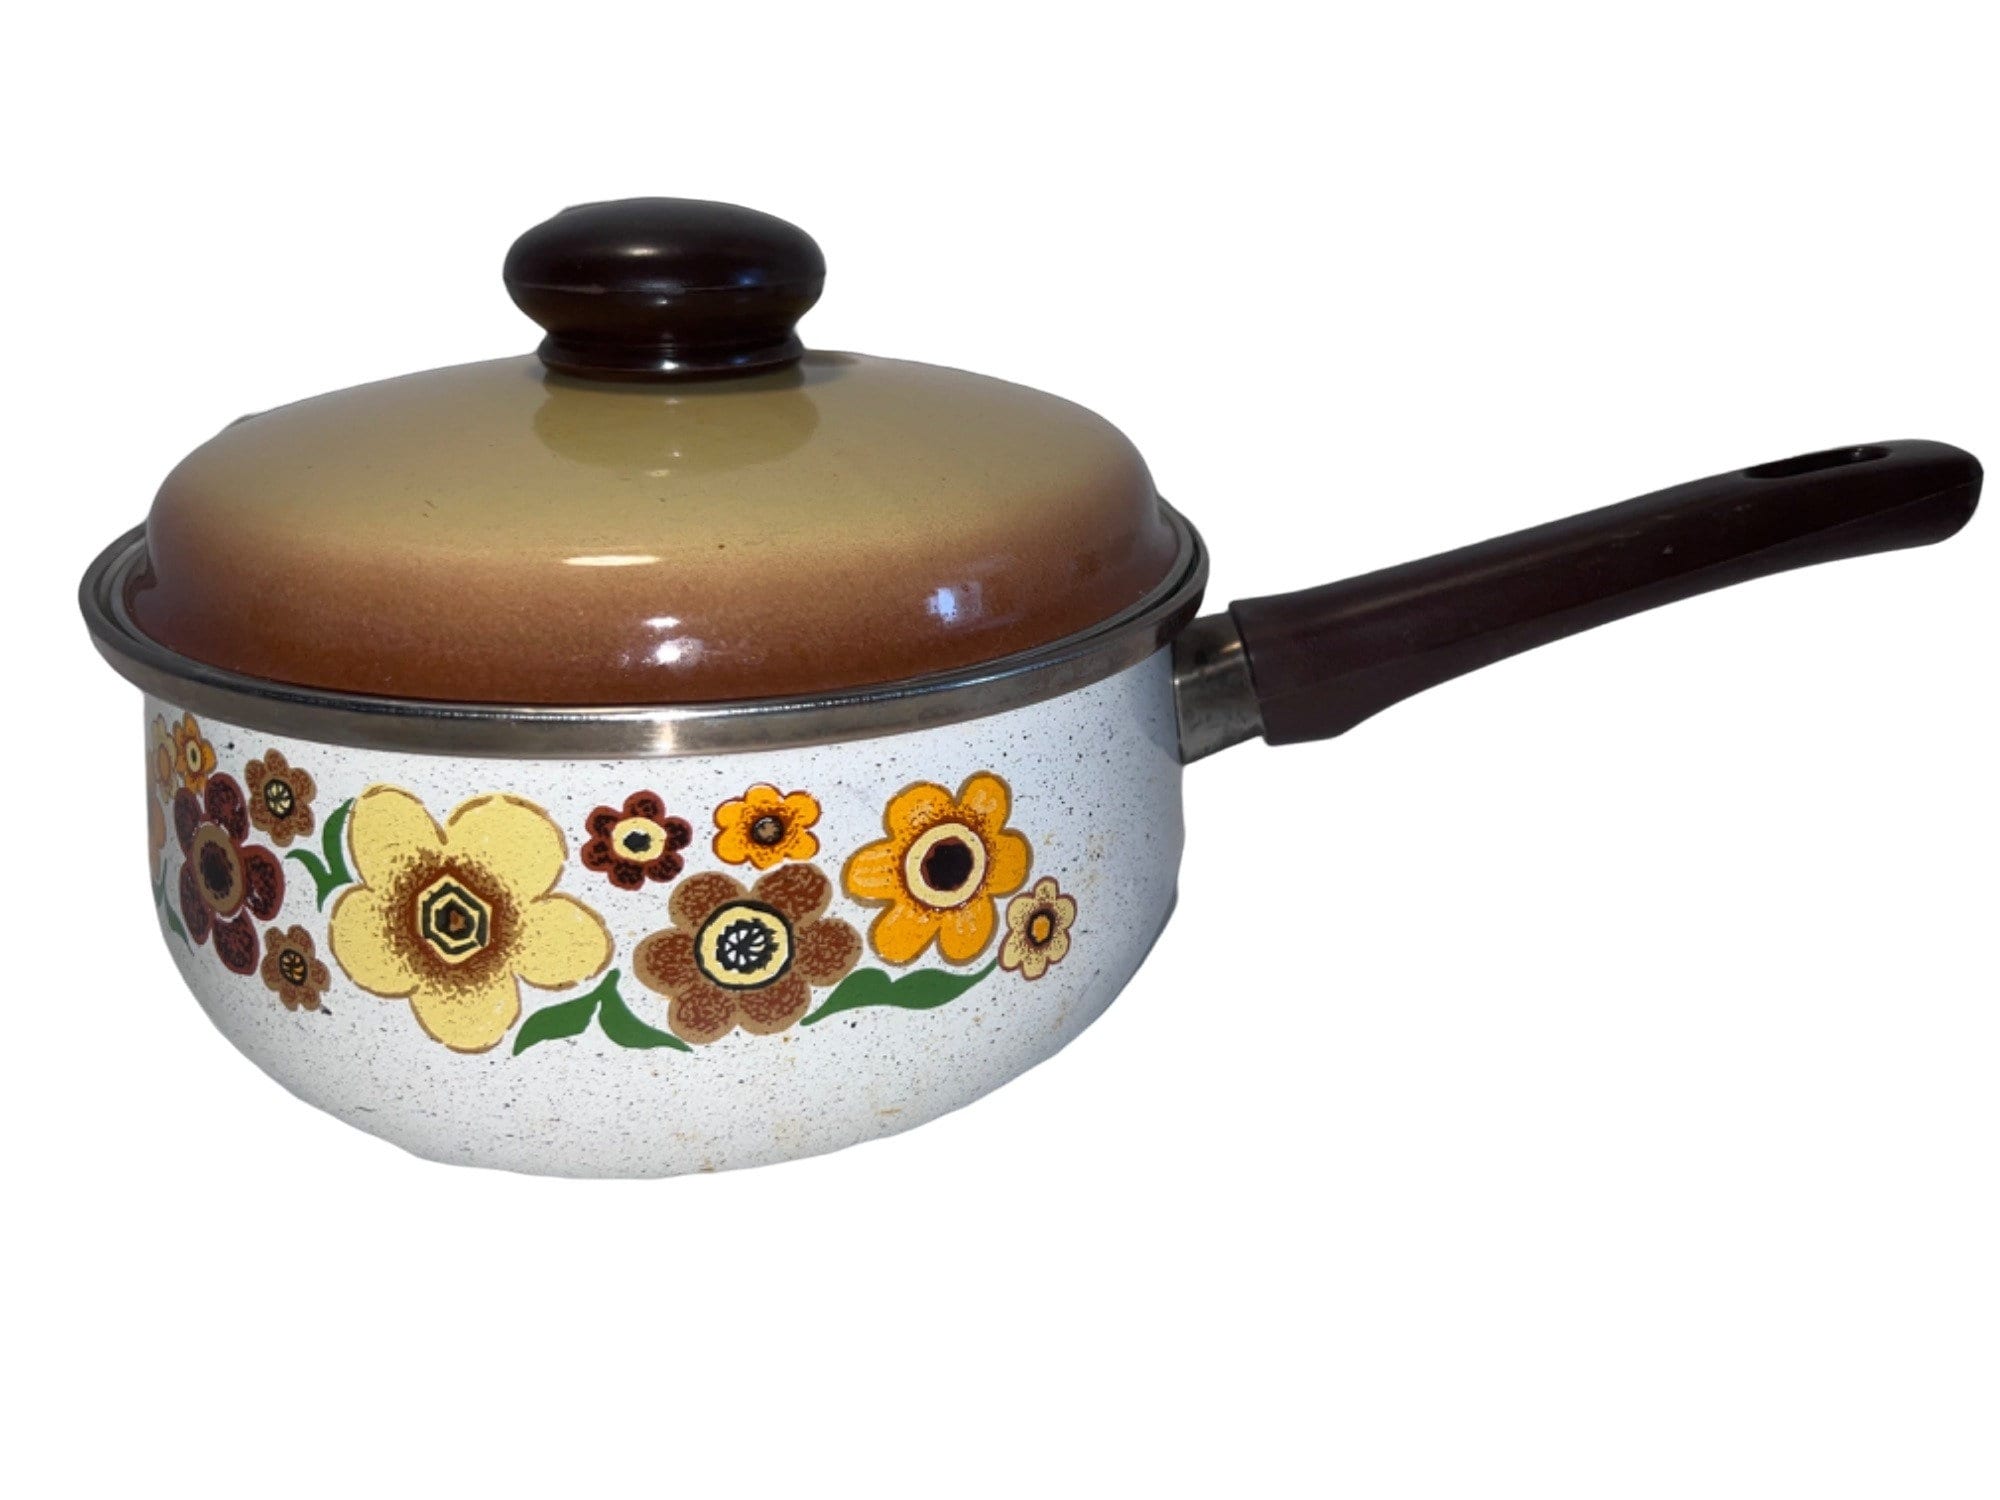 Vintage Handcrafted 8 1/2 Sauté Pan Crowning Touch Porcelain Enamel Cookware  Harvest Blossom With Lid. Made in Spain. 